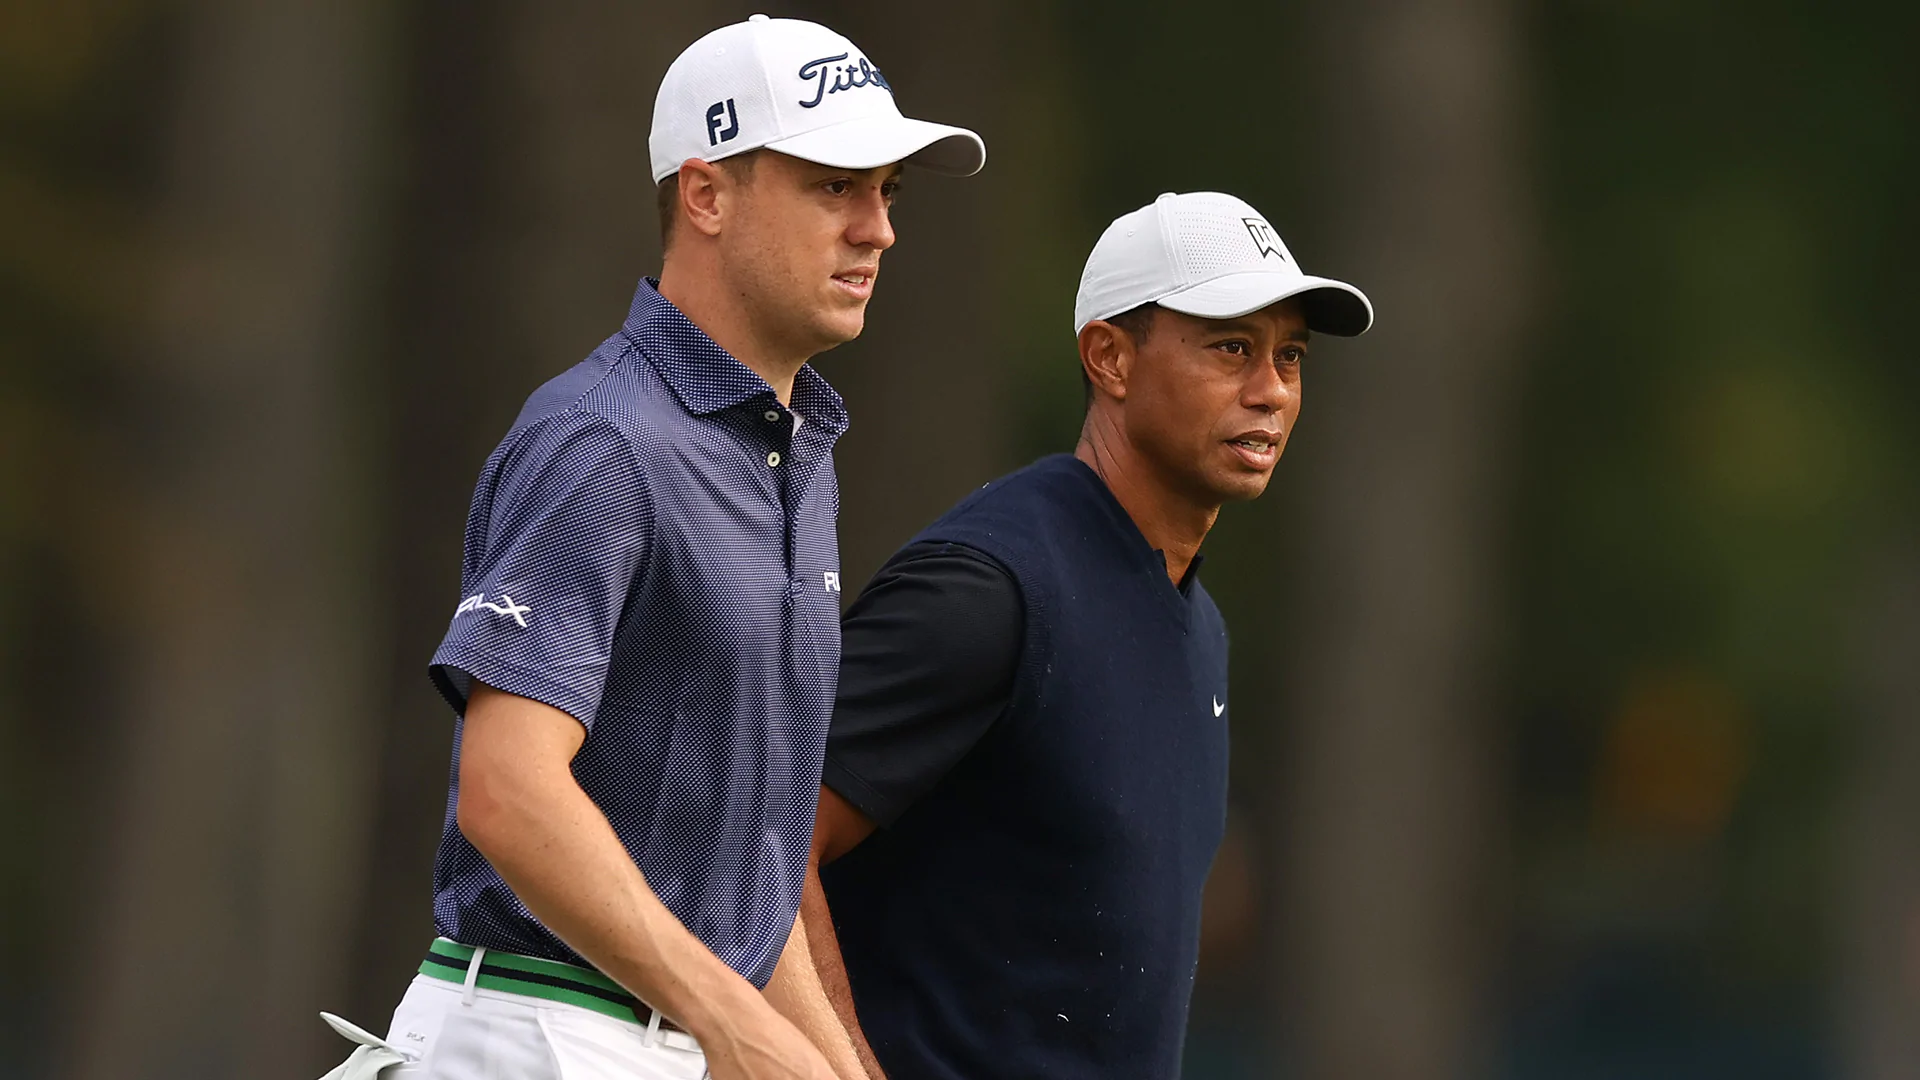 2021 Masters: Justin Thomas – and Tiger Woods – ‘bummed’ to not play practice round together